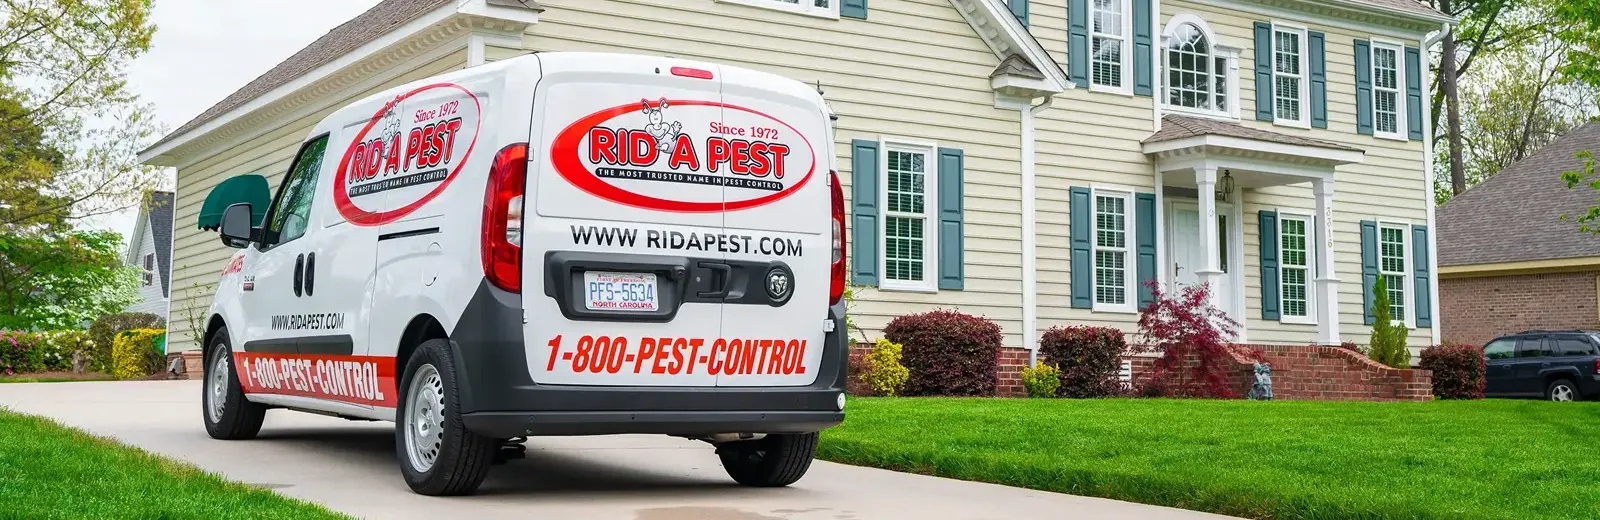 Rid-a-Pest van in front of home